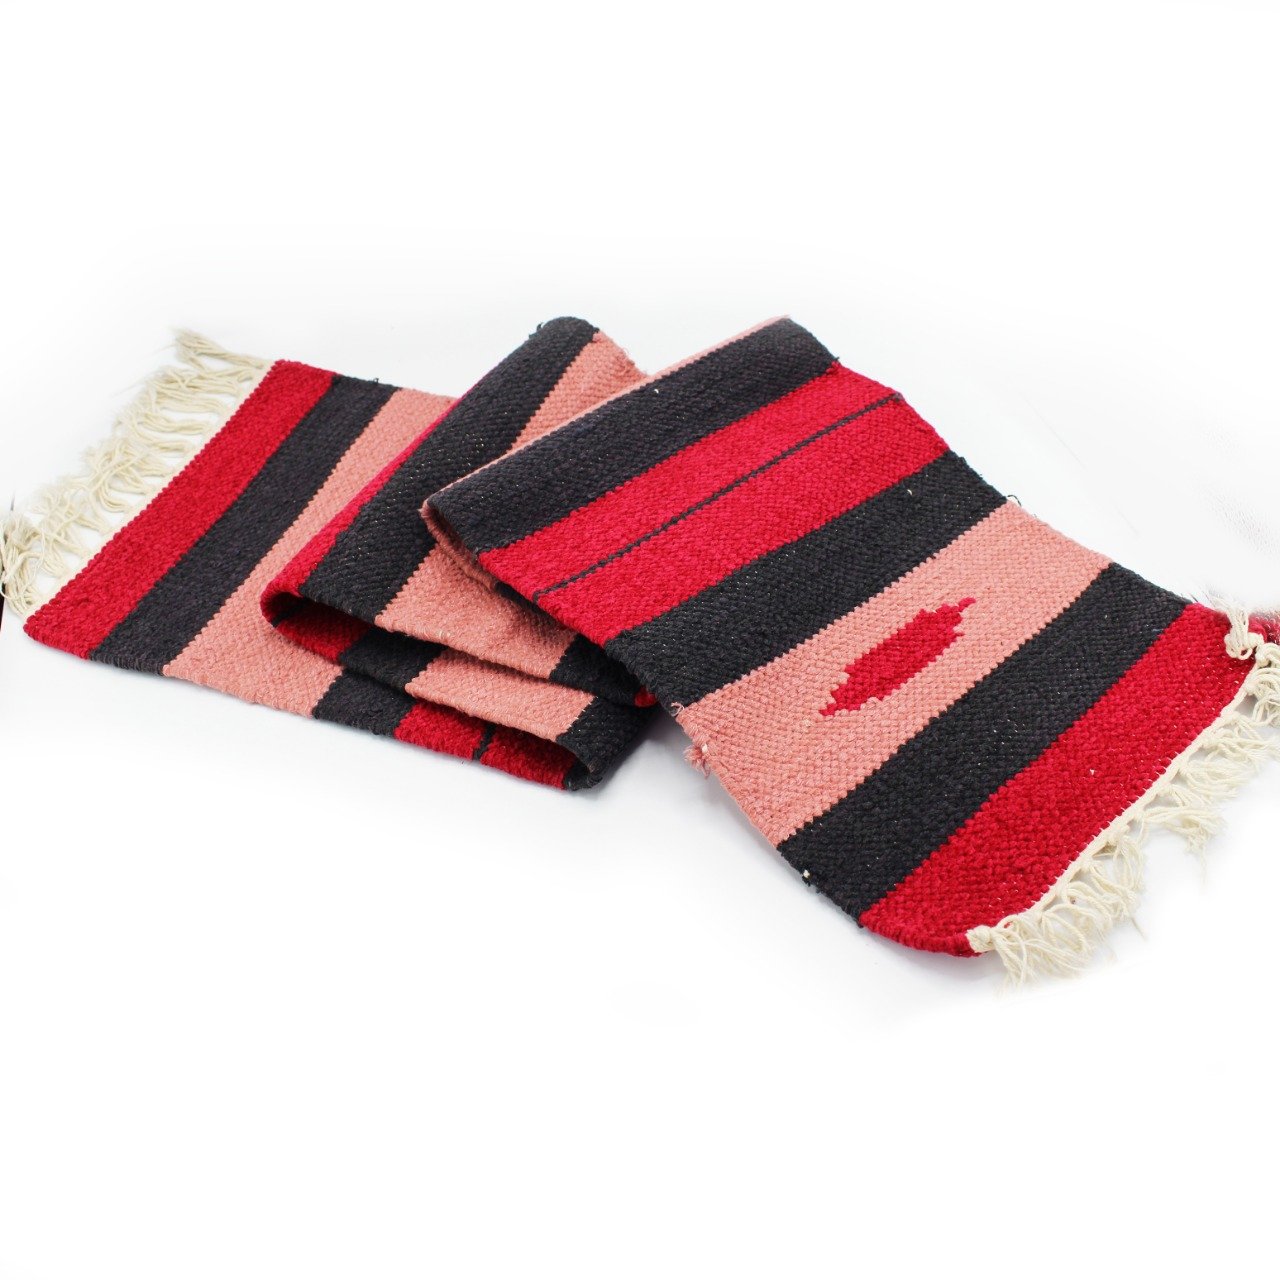 TABLE RUNNER 1 PC SET - Woolen Patterned - waseeh.com